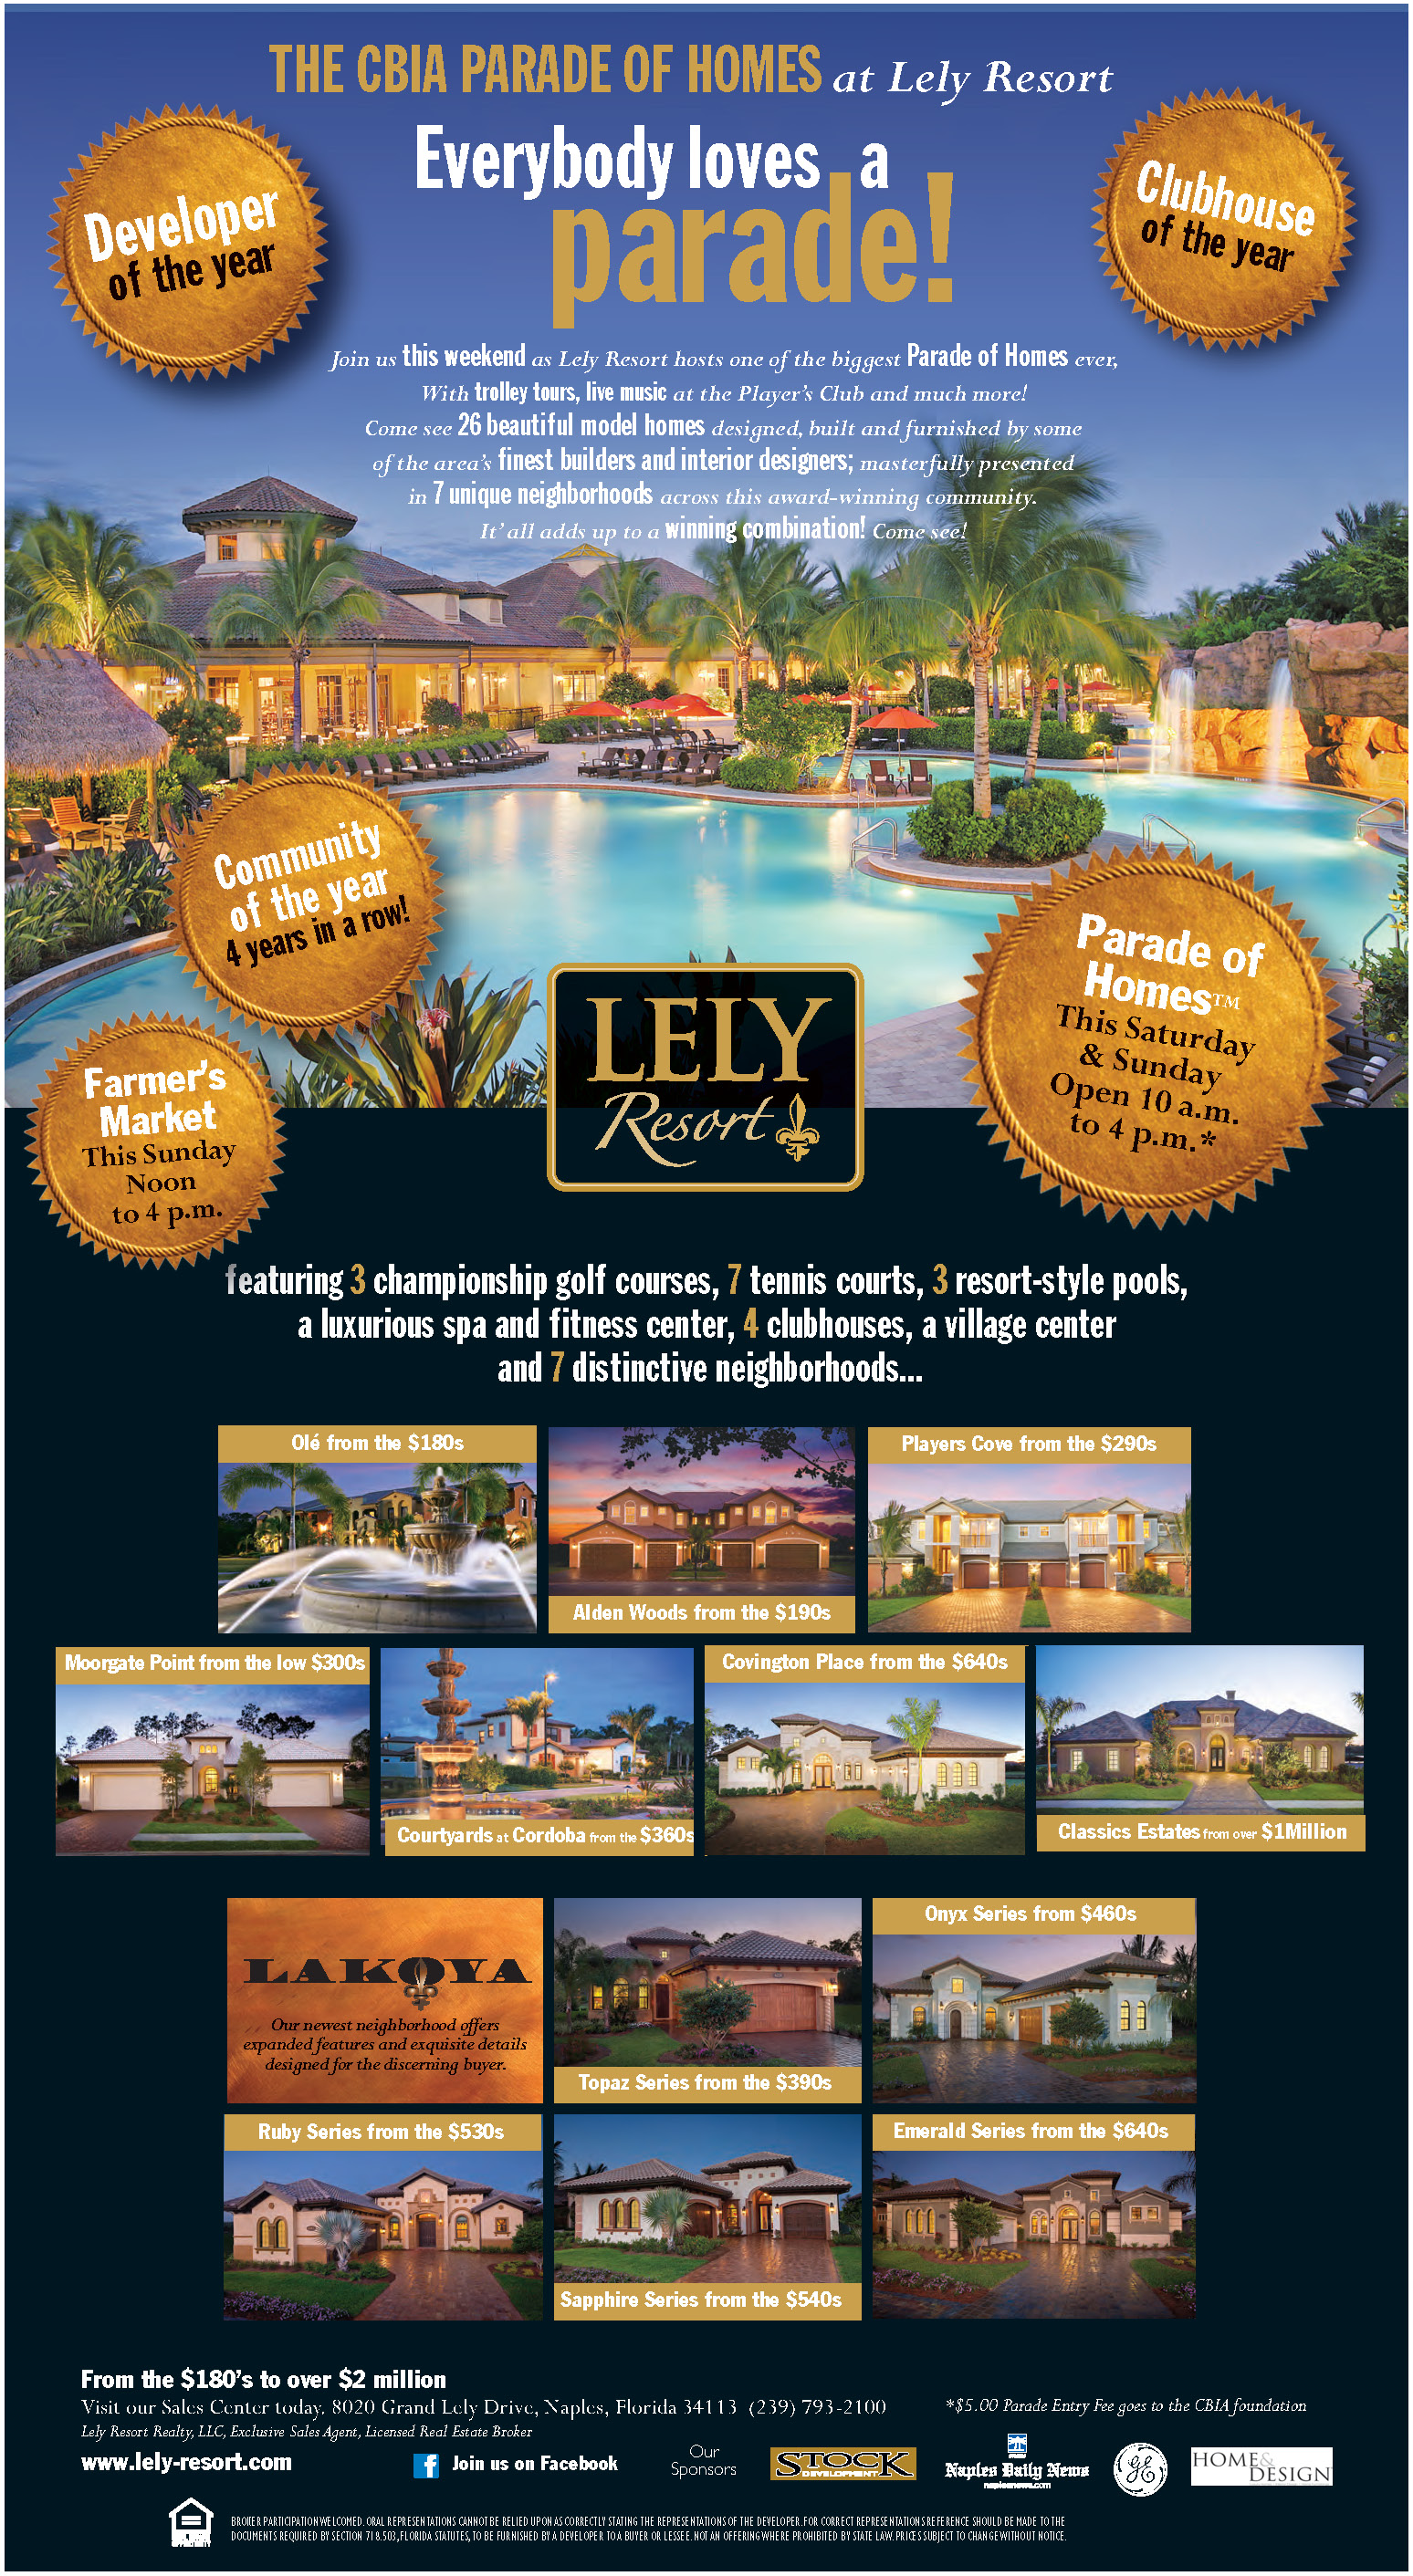 Lely Resort destination on the Parade of Homes tour